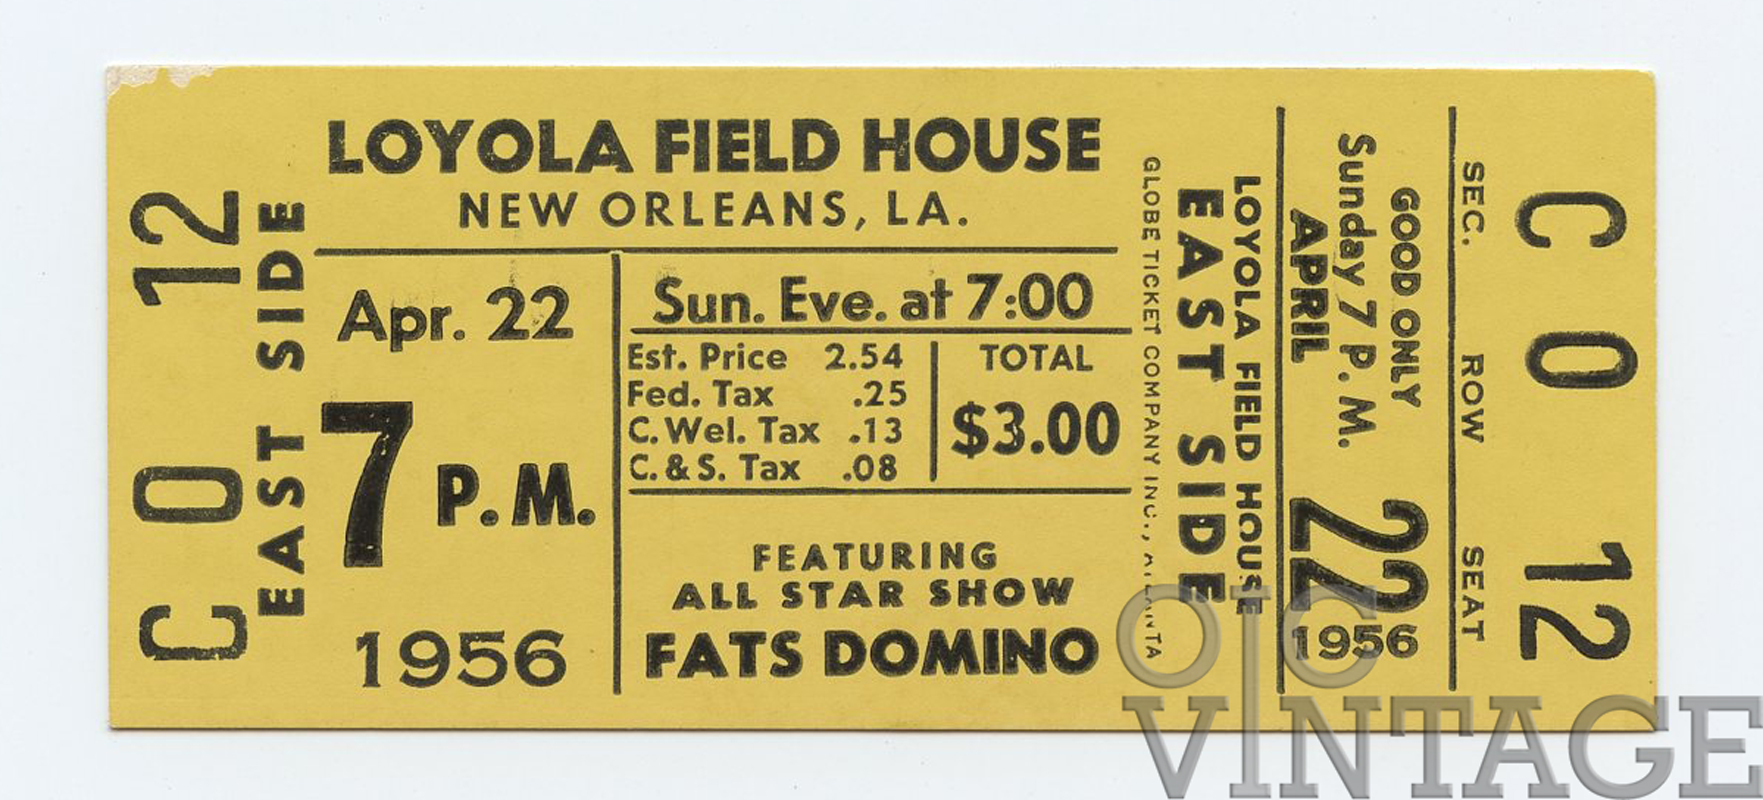 Fats Domino Vintage Ticket 1956 Apr 22 New Orleans 